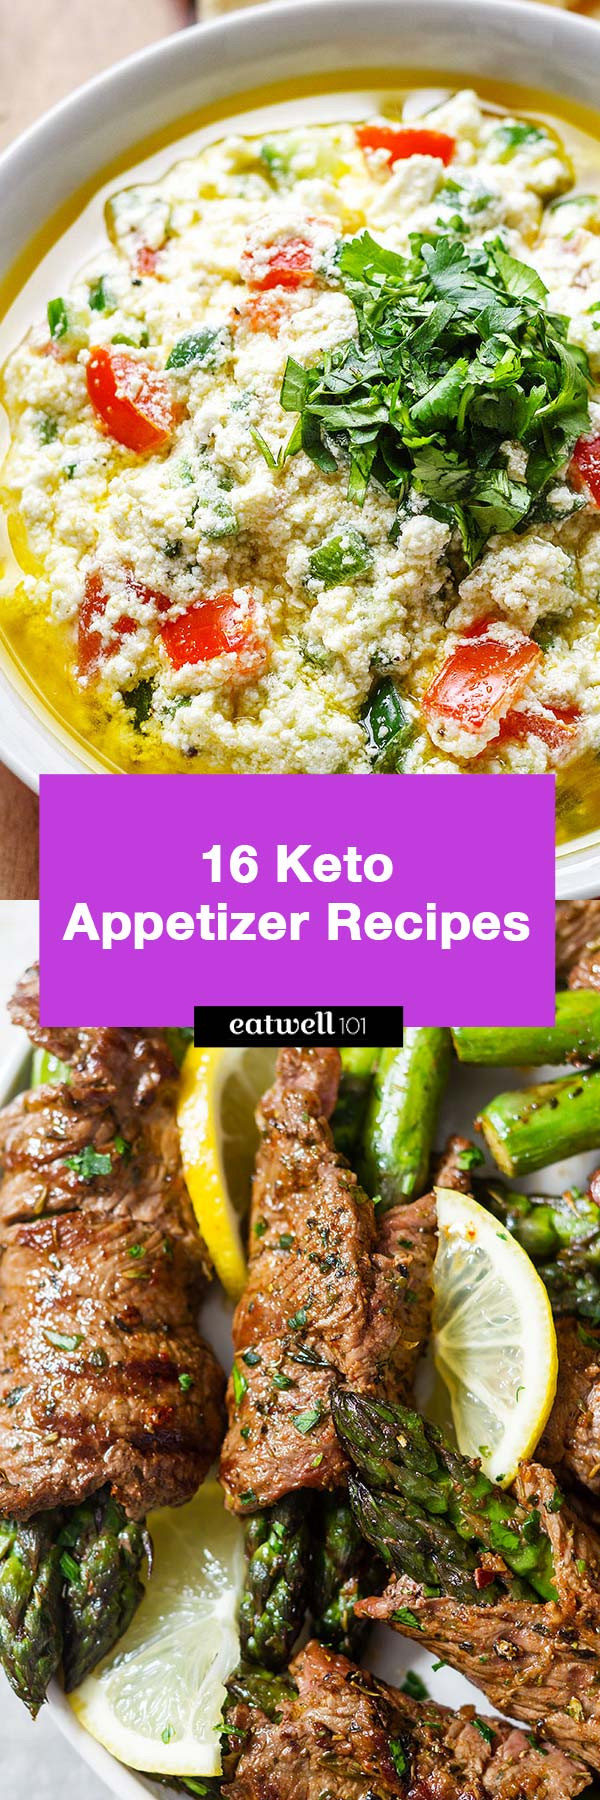 Keto Diet Appetizers
 Keto Appetizer Recipes – 16 Keto Appetizers Perfect for a